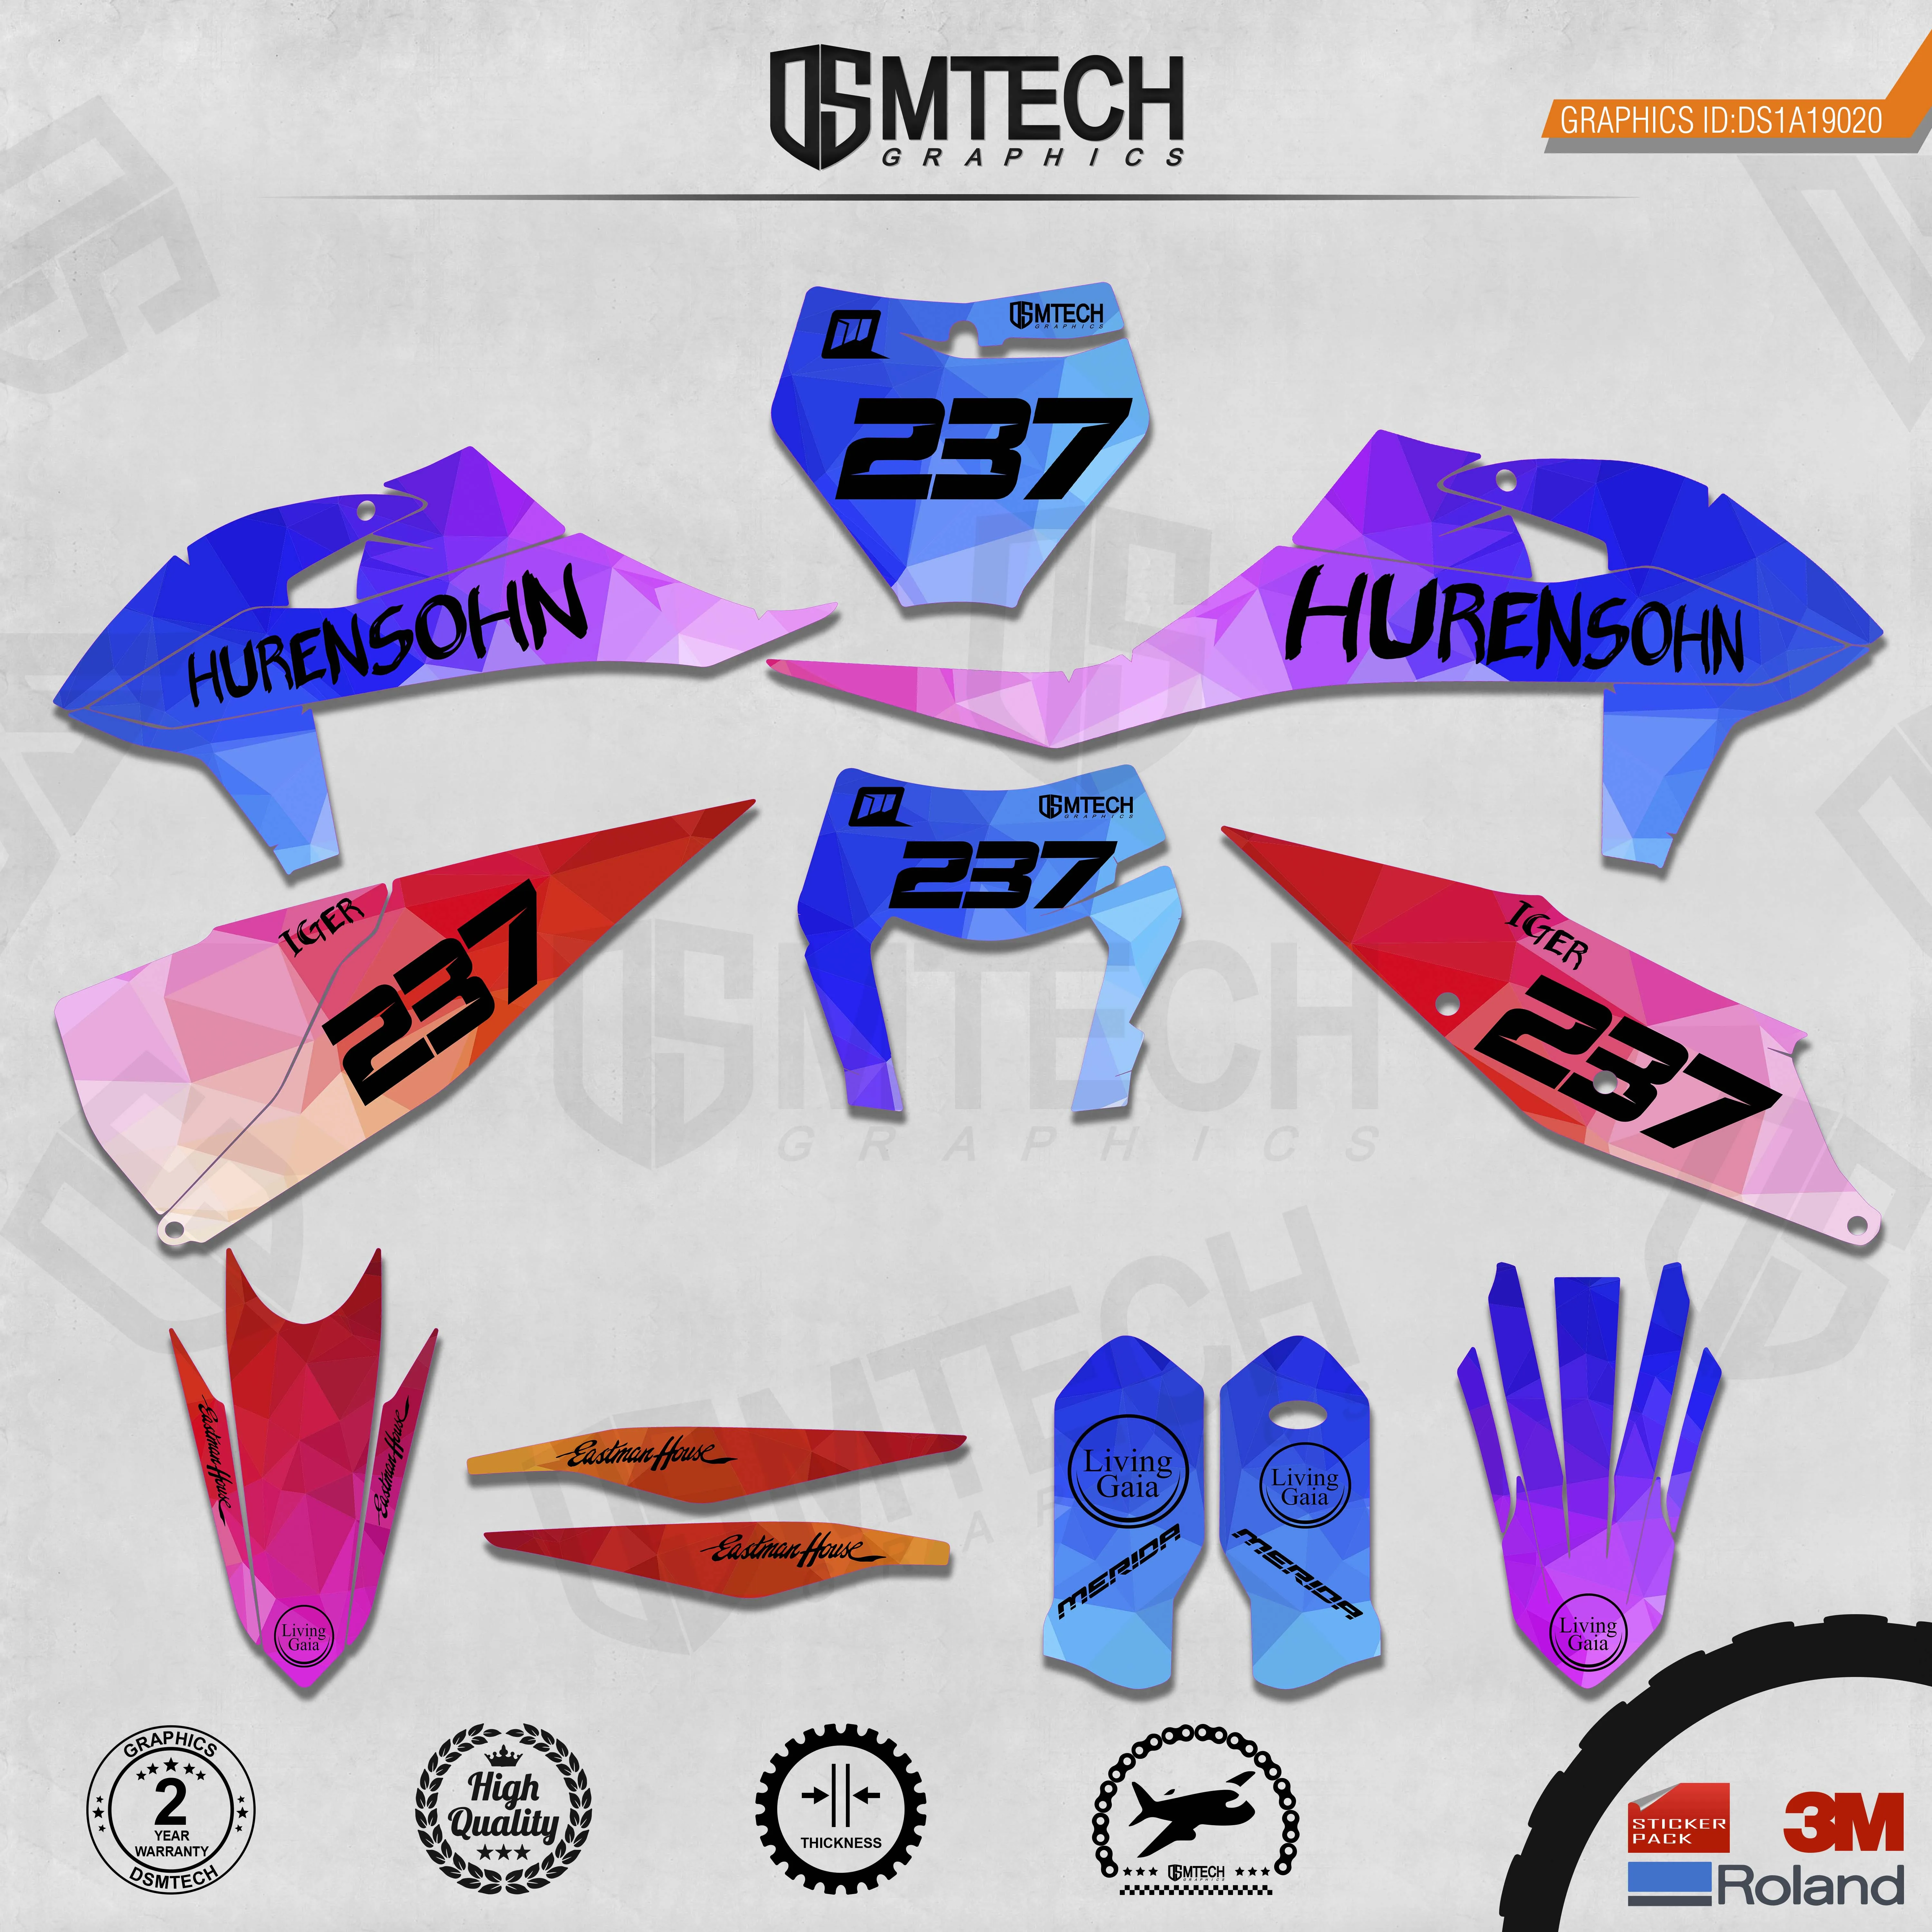 dsmtech-customized-team-graphics-backgrounds-decals-3m-custom-stickers-for-2019-2020-sxf-2020-2021exc-020